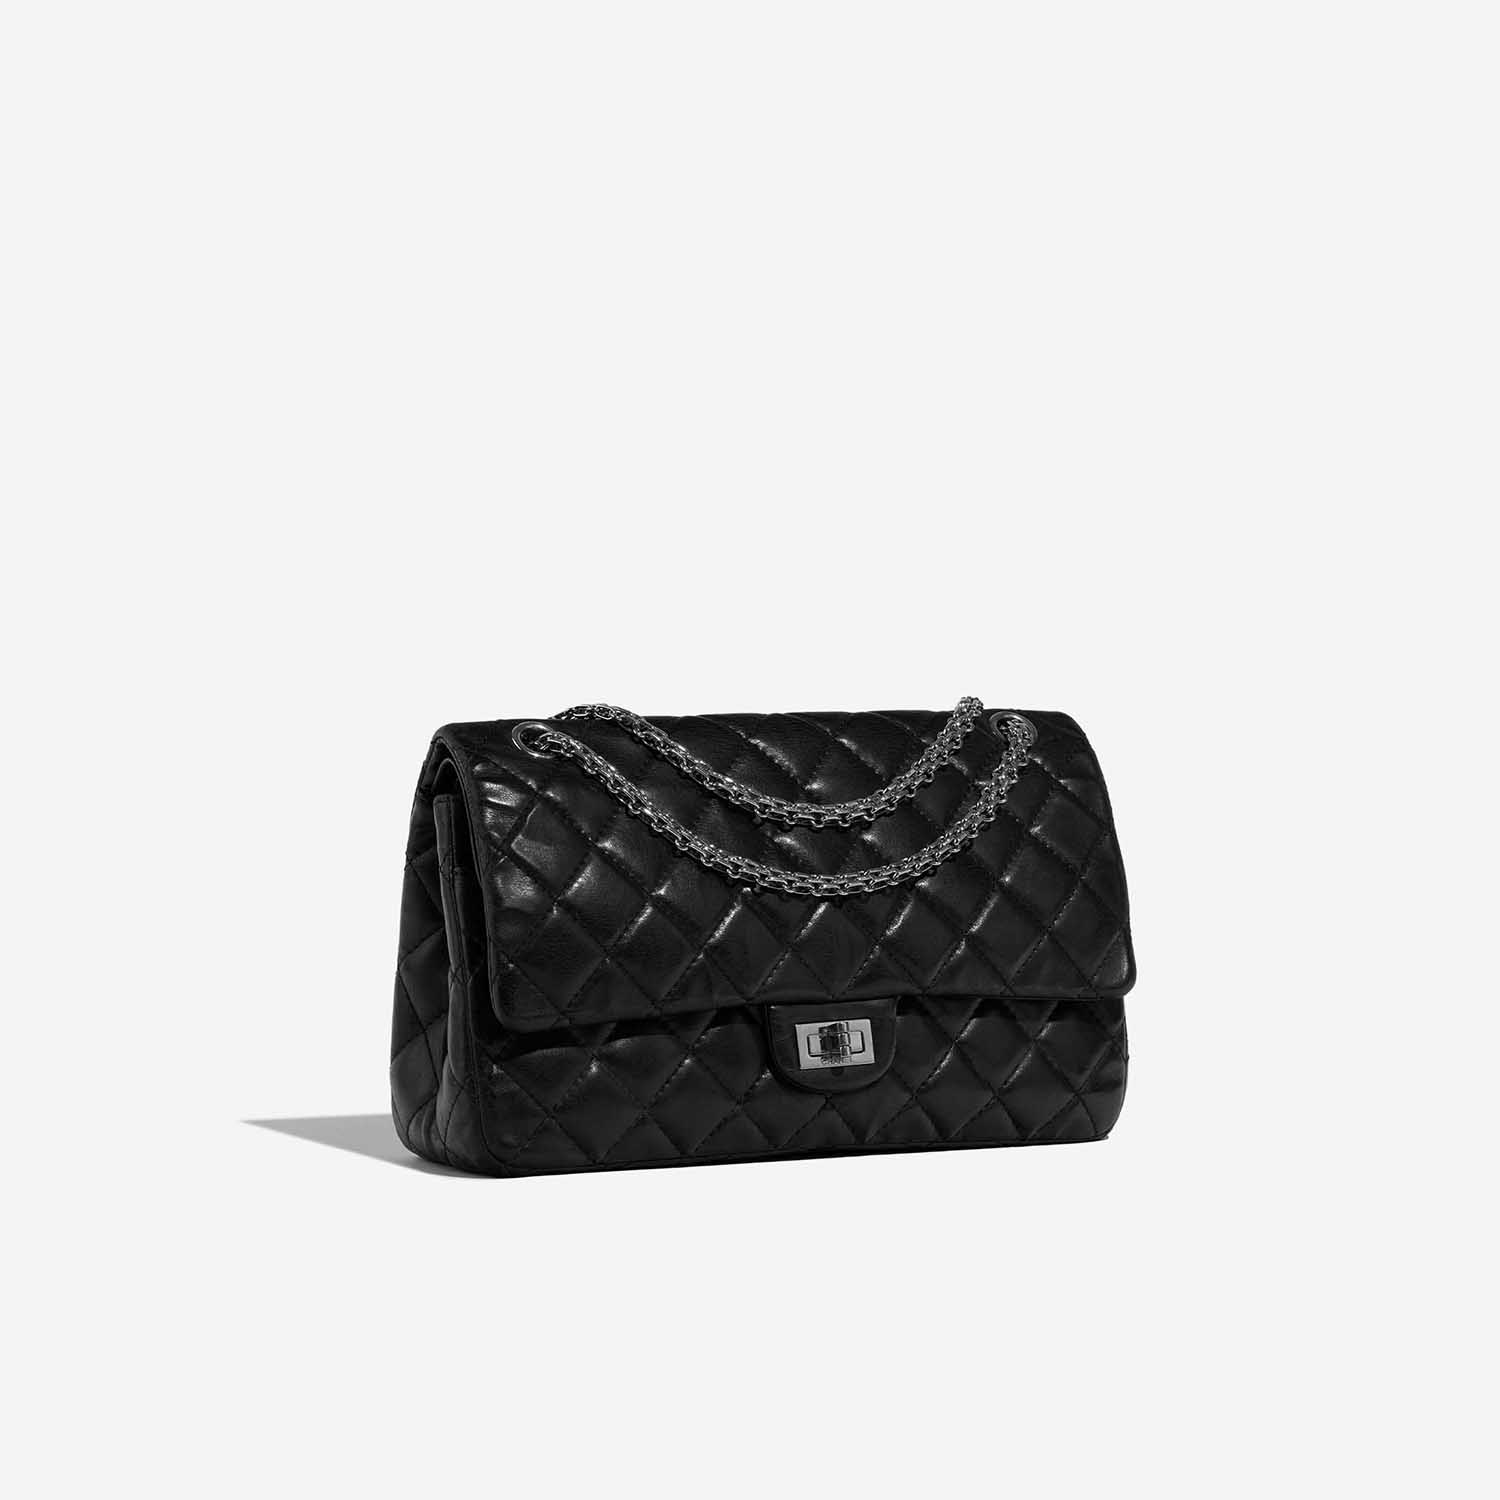 black chanel clutch with chain